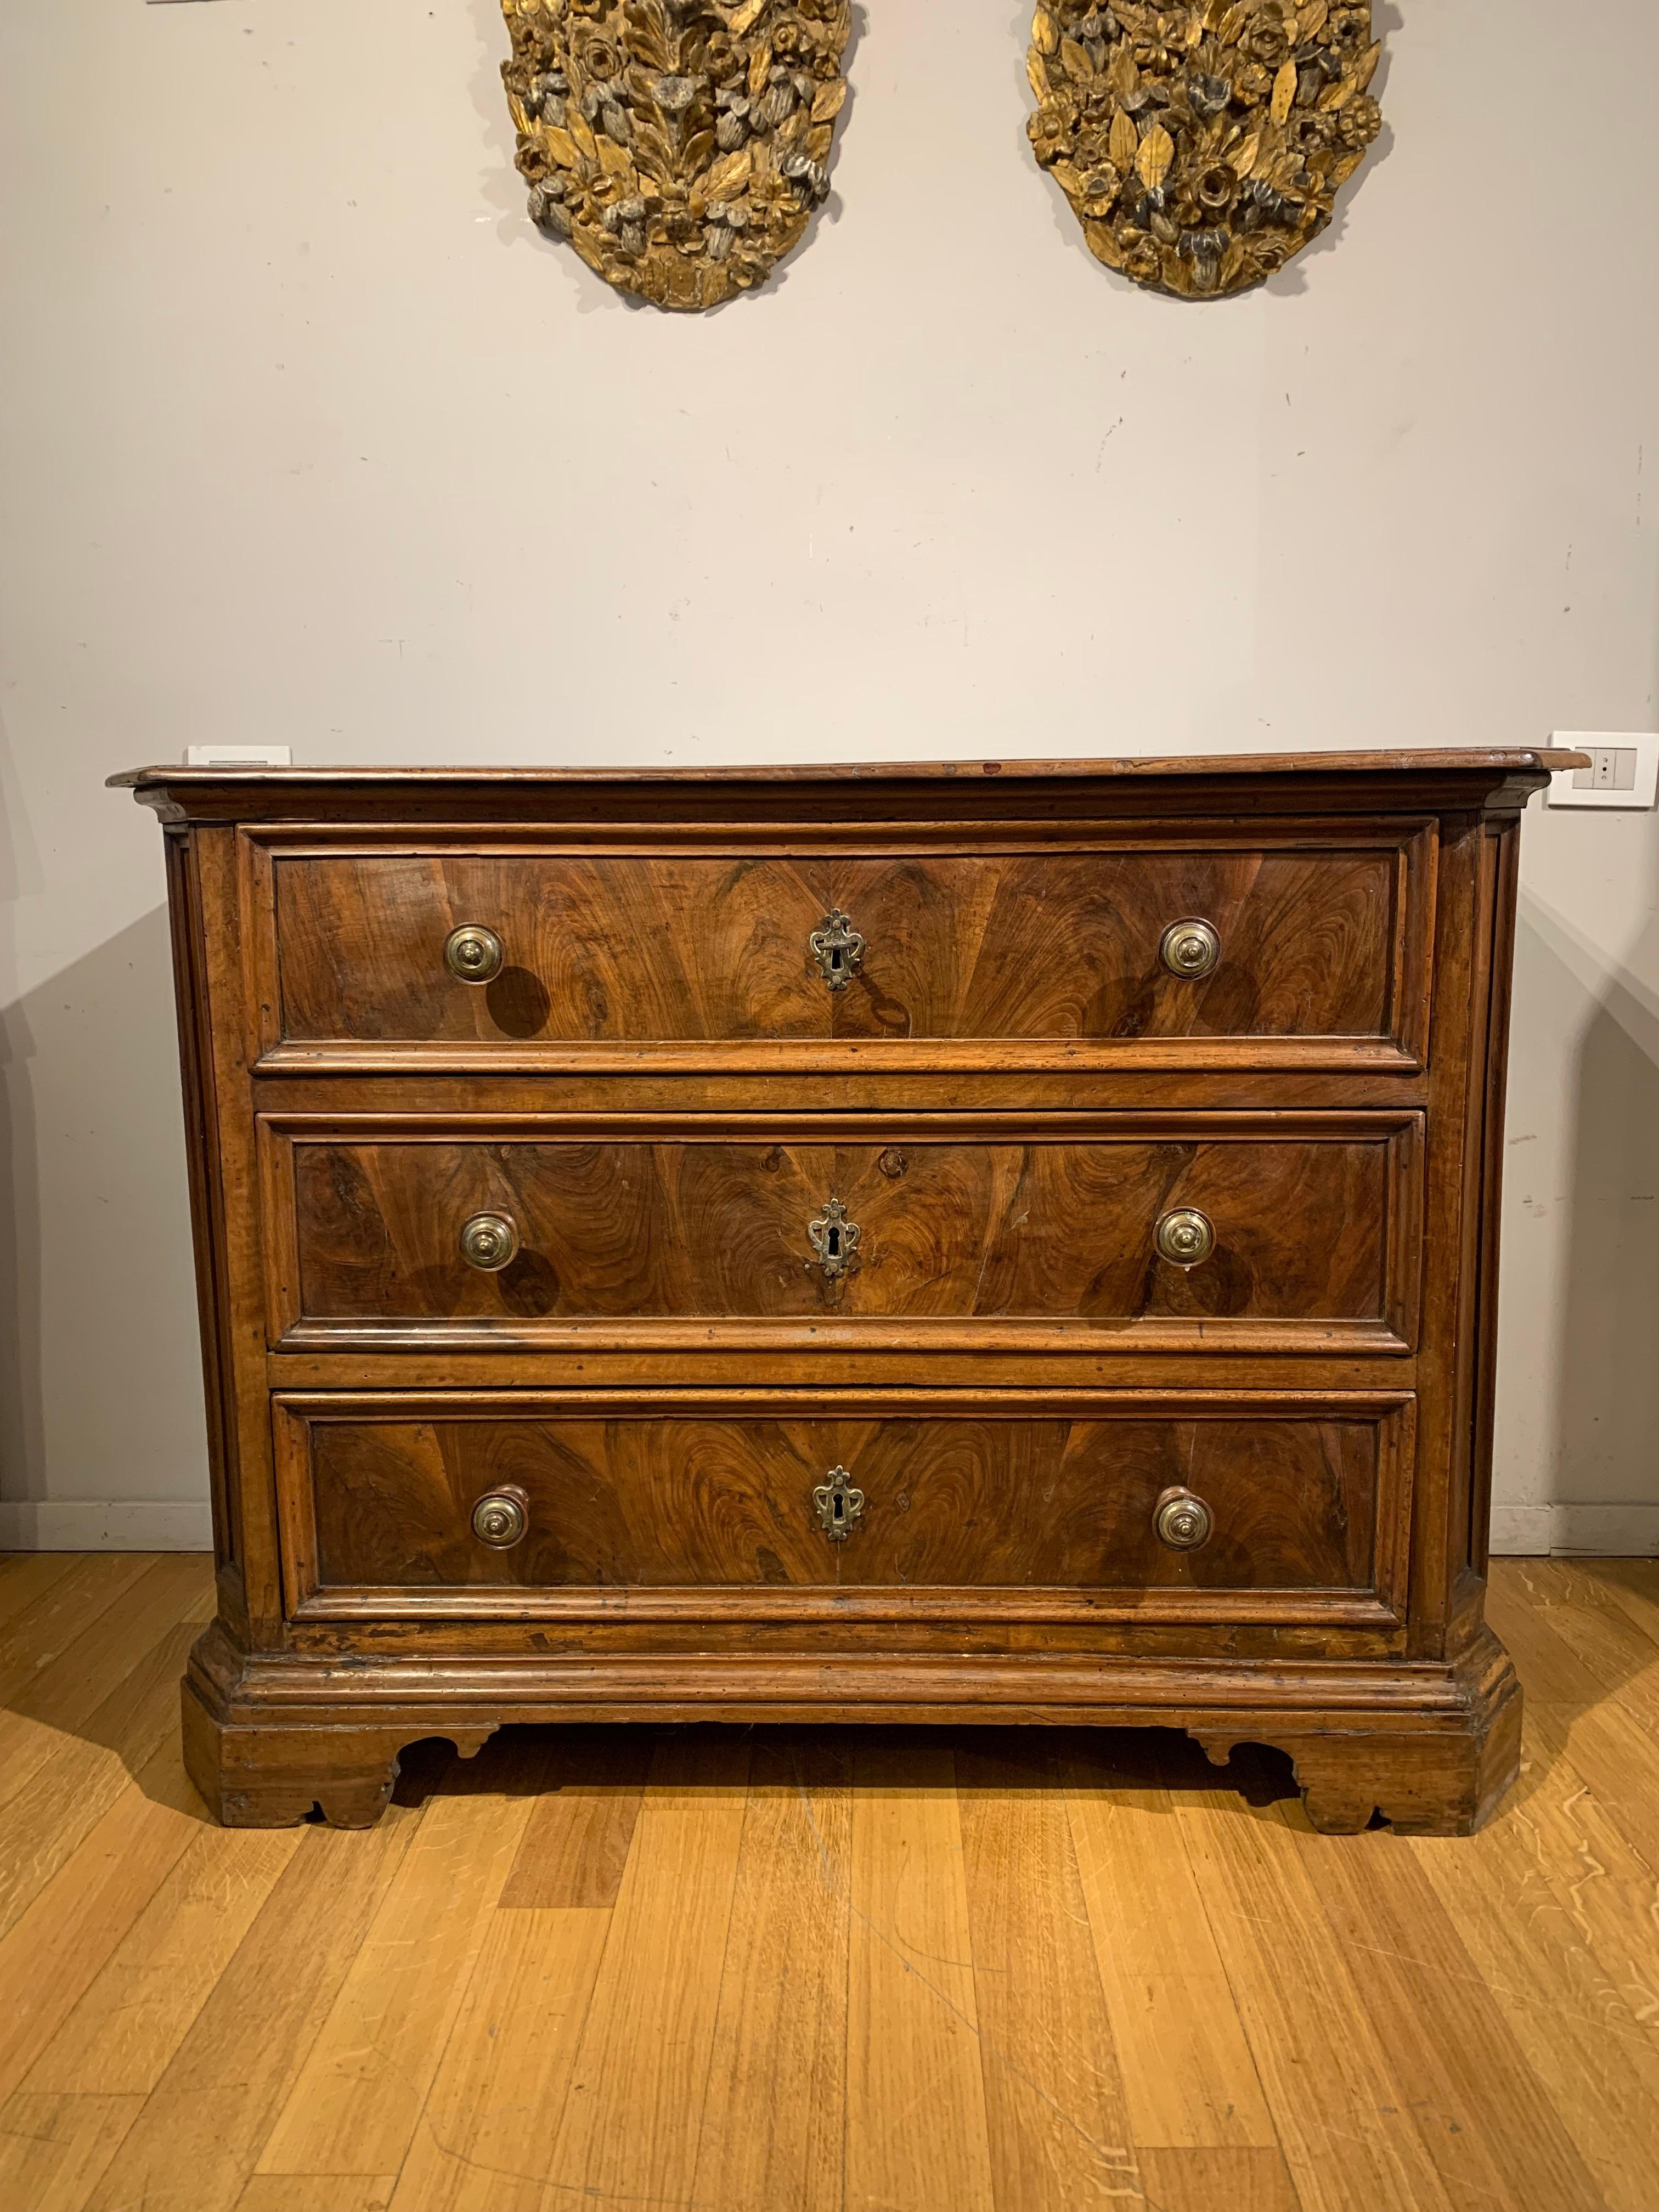 Beautiful small chest of drawers in solid walnut, slightly notched, top with bull's beak edge, three full-body drawers veneered in walnut with frames in solid walnut and knobs with bronze applications.
Bracket feet, original bronze and iron